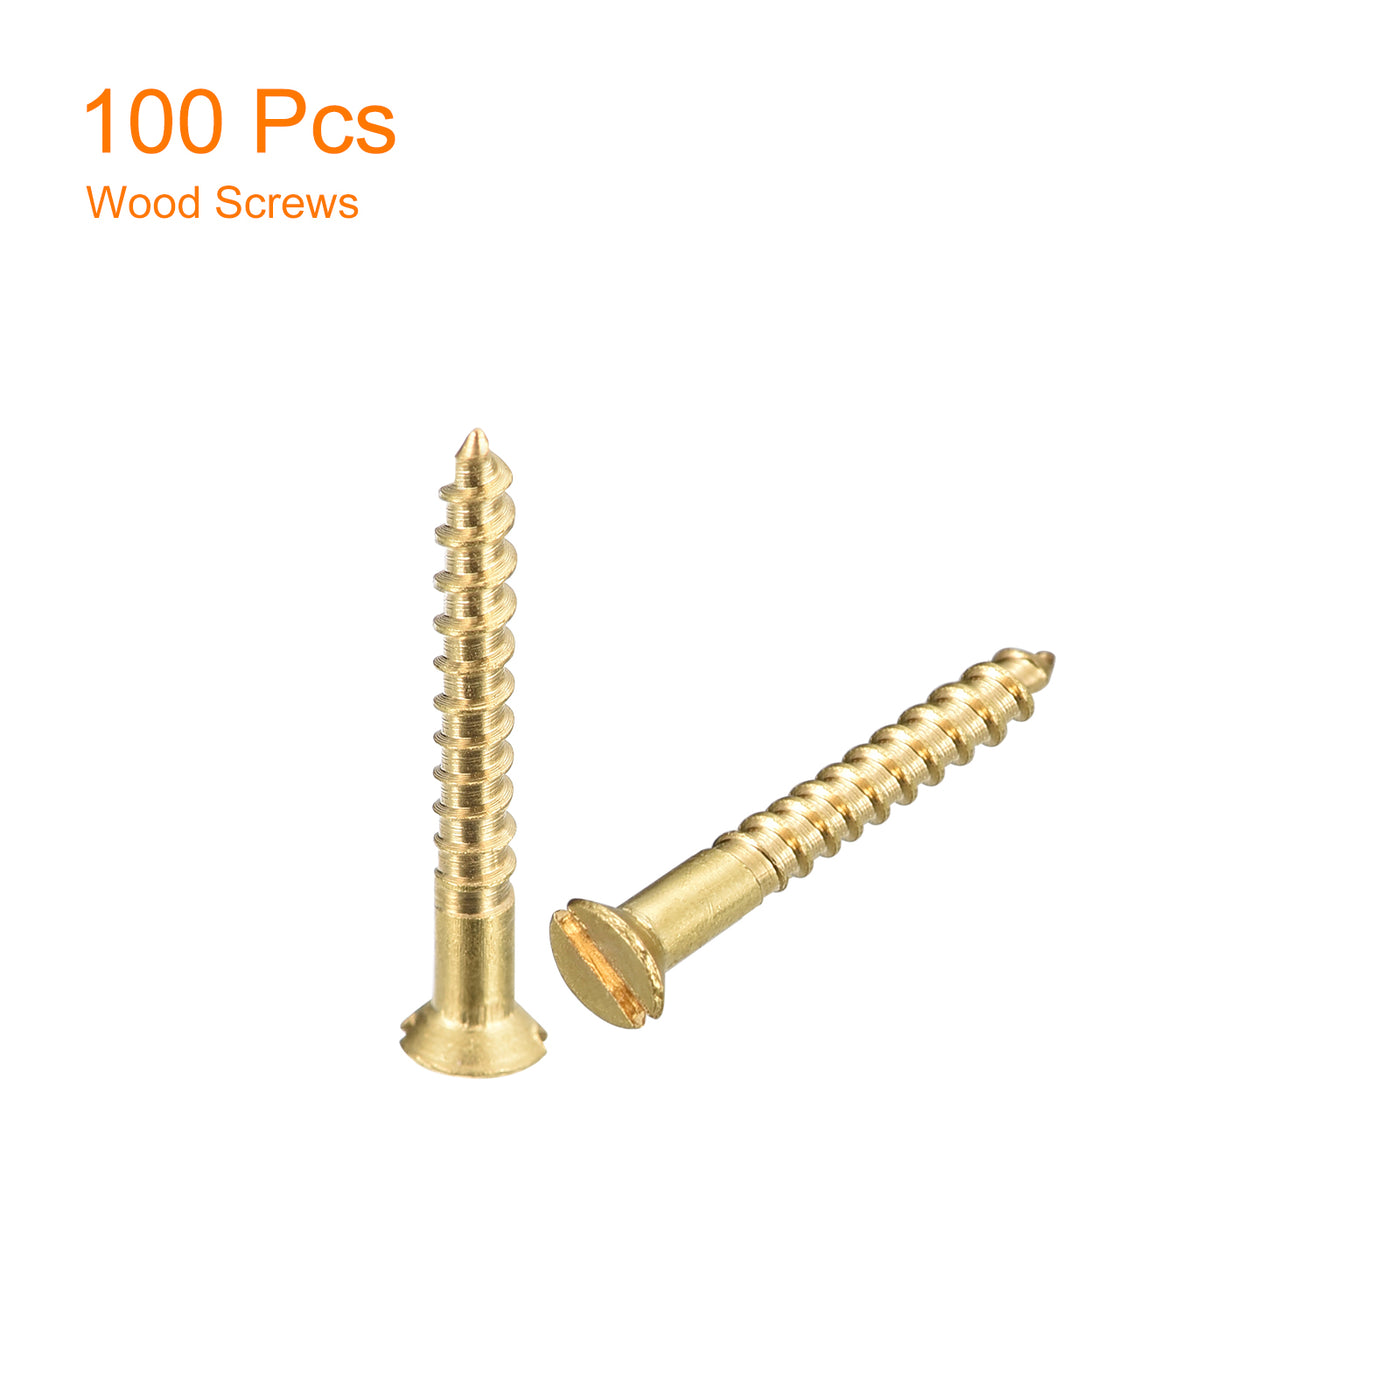 uxcell Uxcell 100Pcs M2 x 16mm Brass Slotted Drive Flat Head Wood Screws Self Tapping Screw